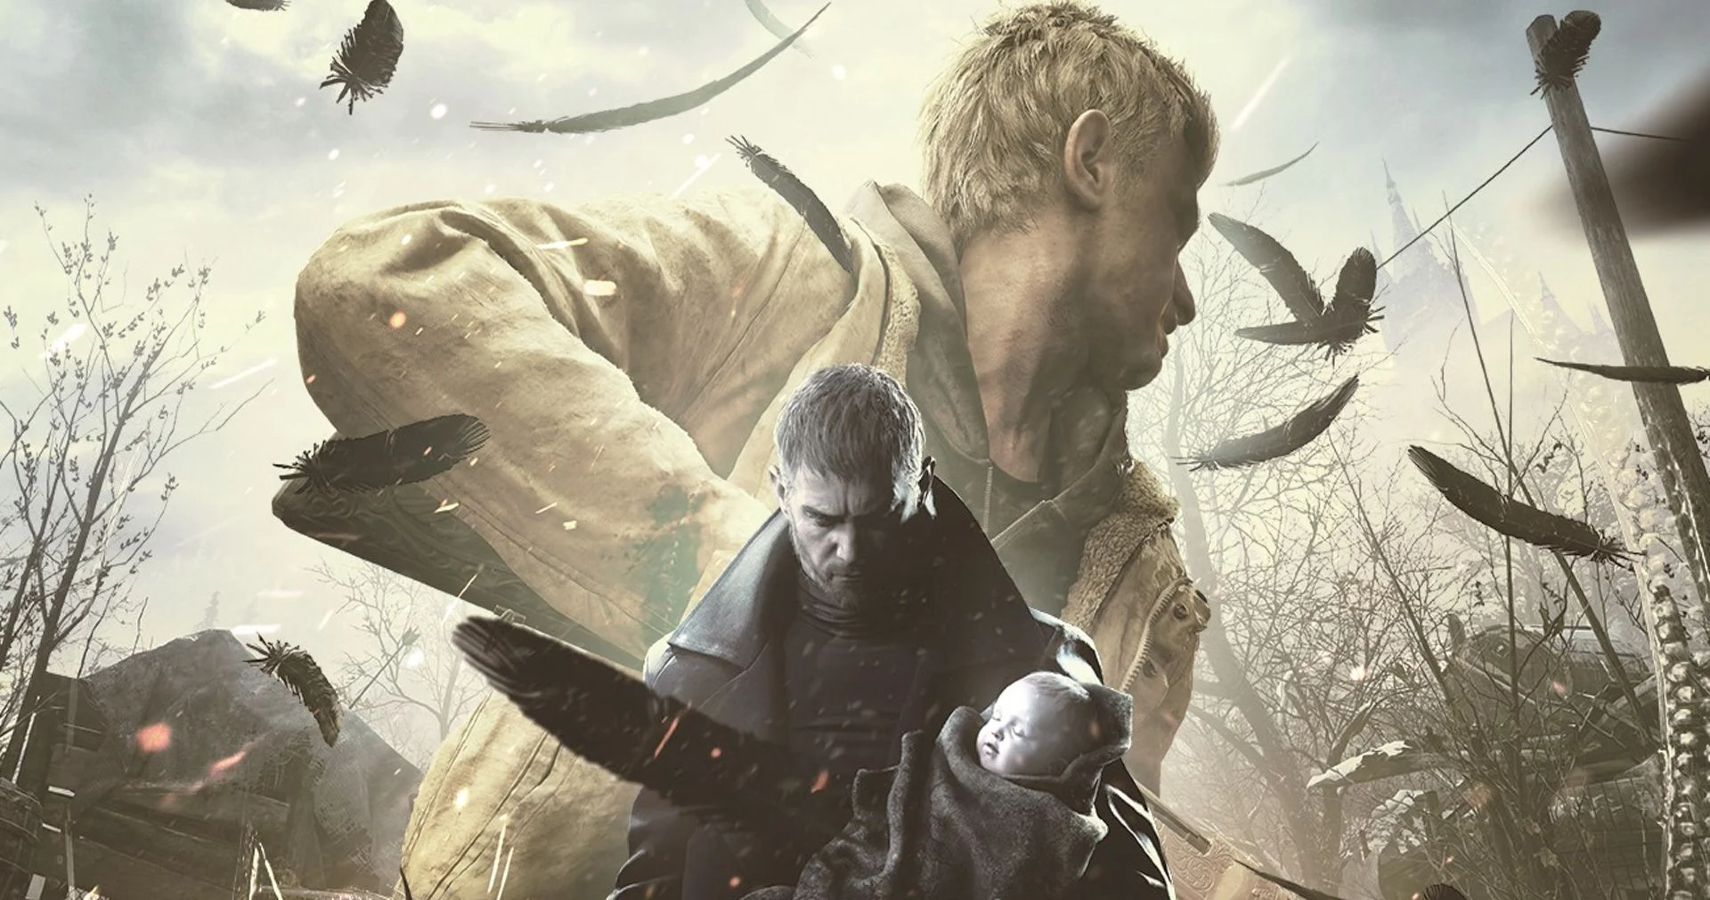 Chris Redfield stands in front, holding a baby. He is wearing a trenchcoat. Ethan is in the background with his head turned away from the viewer. Feathers fall from the sky.